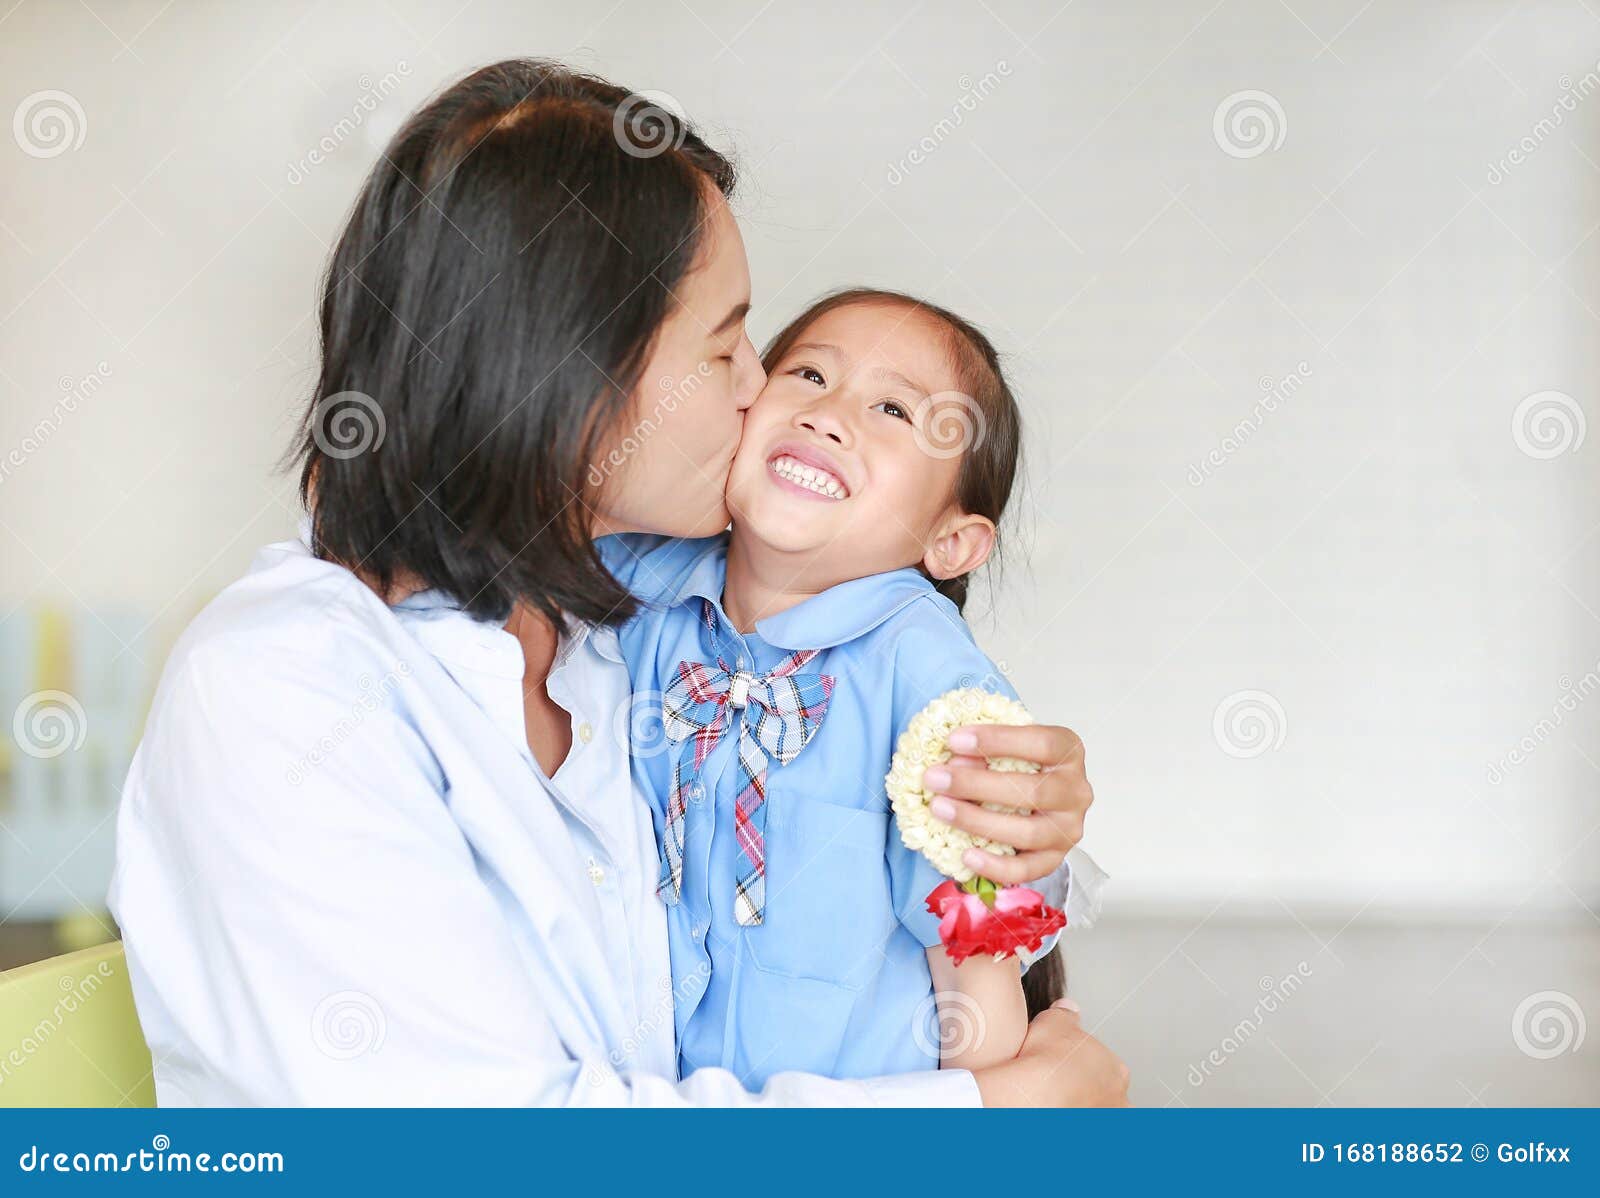 Portrait Of Asian Mom Kissing And Hugging Her Daughter On